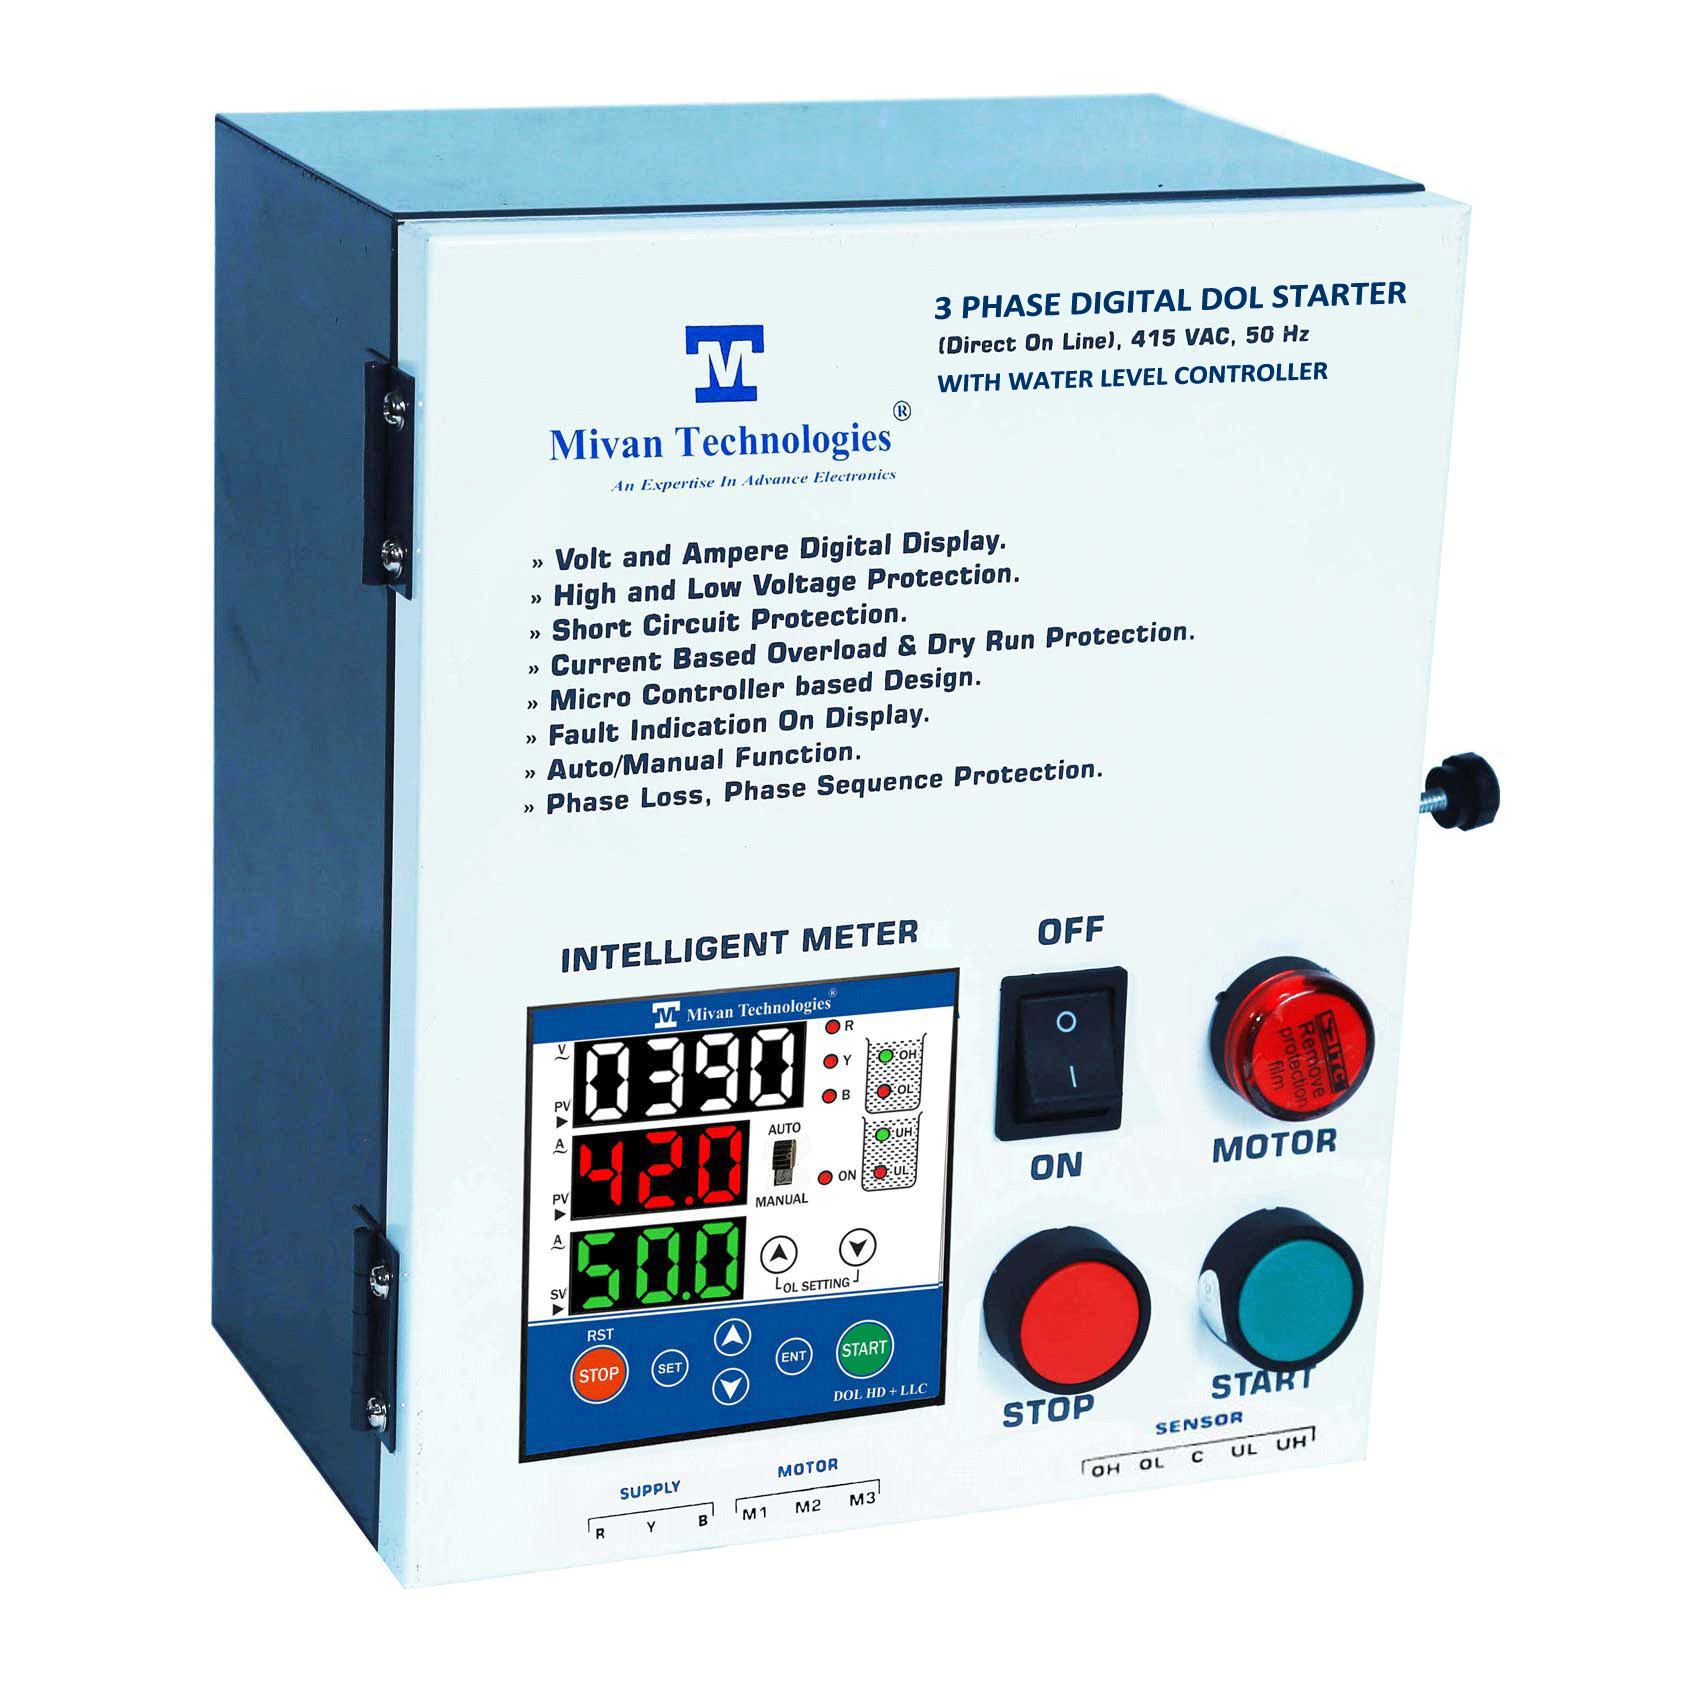 3 phase 3 display Heavy Duty Water level controller with DOL motor starter with HV LV OL Dry protection with Auto switch spp and timer suitable up to 50 hp DOL HD 3D LLC 90 A